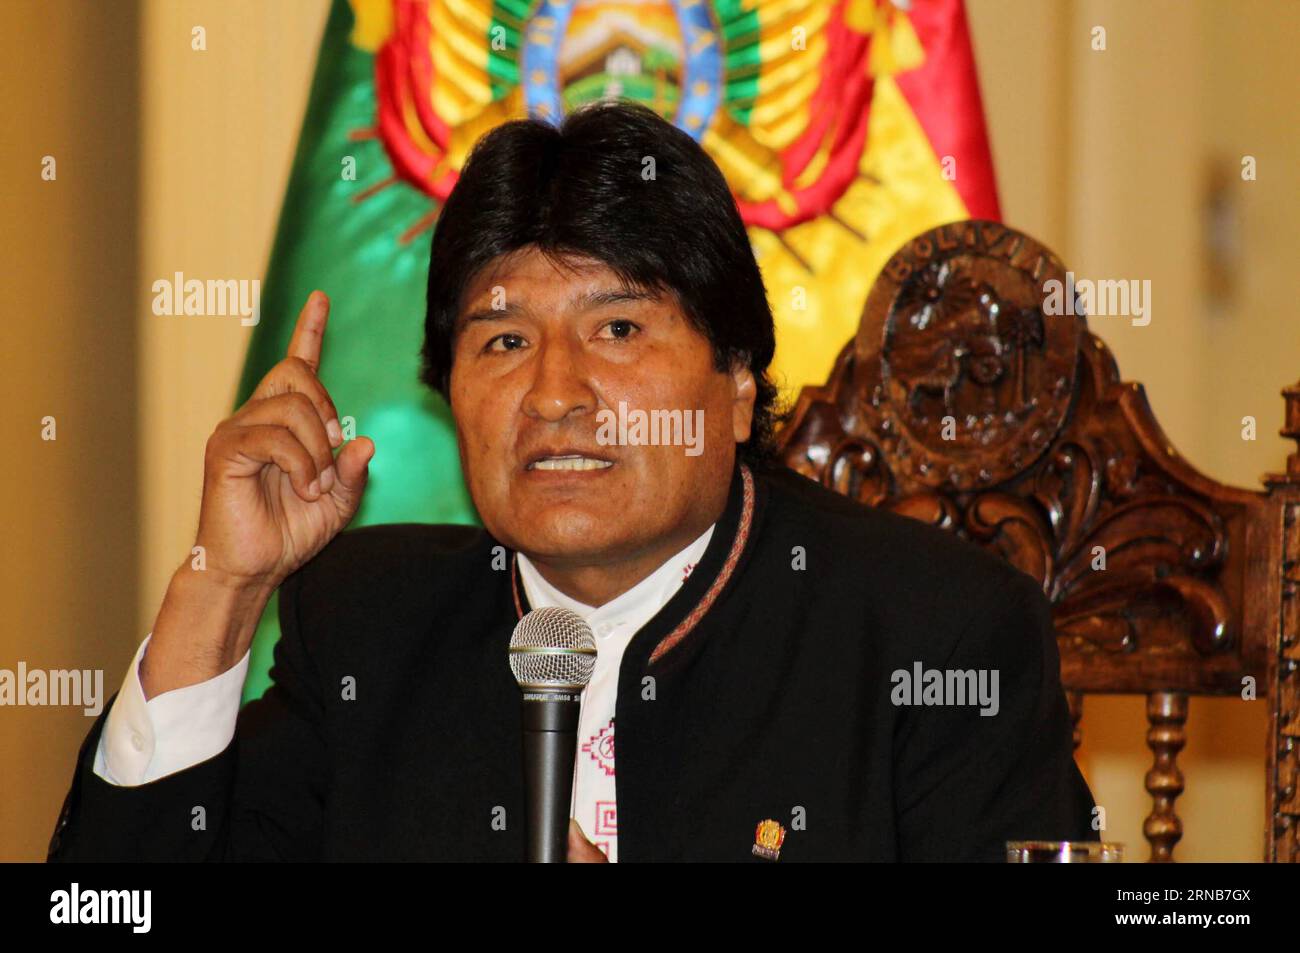 Bolivia s President, Evo Morales, takes part during a press conference on Sunday s referendum referendum, in La Paz, Bolivia, on Feb. 22, 2016. Bolivian President Evo Morales was set to lose his bid for a fourth consecutive term, preliminary results of Sunday s referendum indicated. Jose Lirauze) (jp) (ah) BOLIVIA-LA PAZ-POLITICS-MORALES ABI PUBLICATIONxNOTxINxCHN   Bolivia S President Evo Morales Takes Part during a Press Conference ON Sunday S Referendum Referendum in La Paz Bolivia ON Feb 22 2016 Bolivian President Evo Morales what Set to Lots His BID for a Fourth consecutive Term prelimina Stock Photo